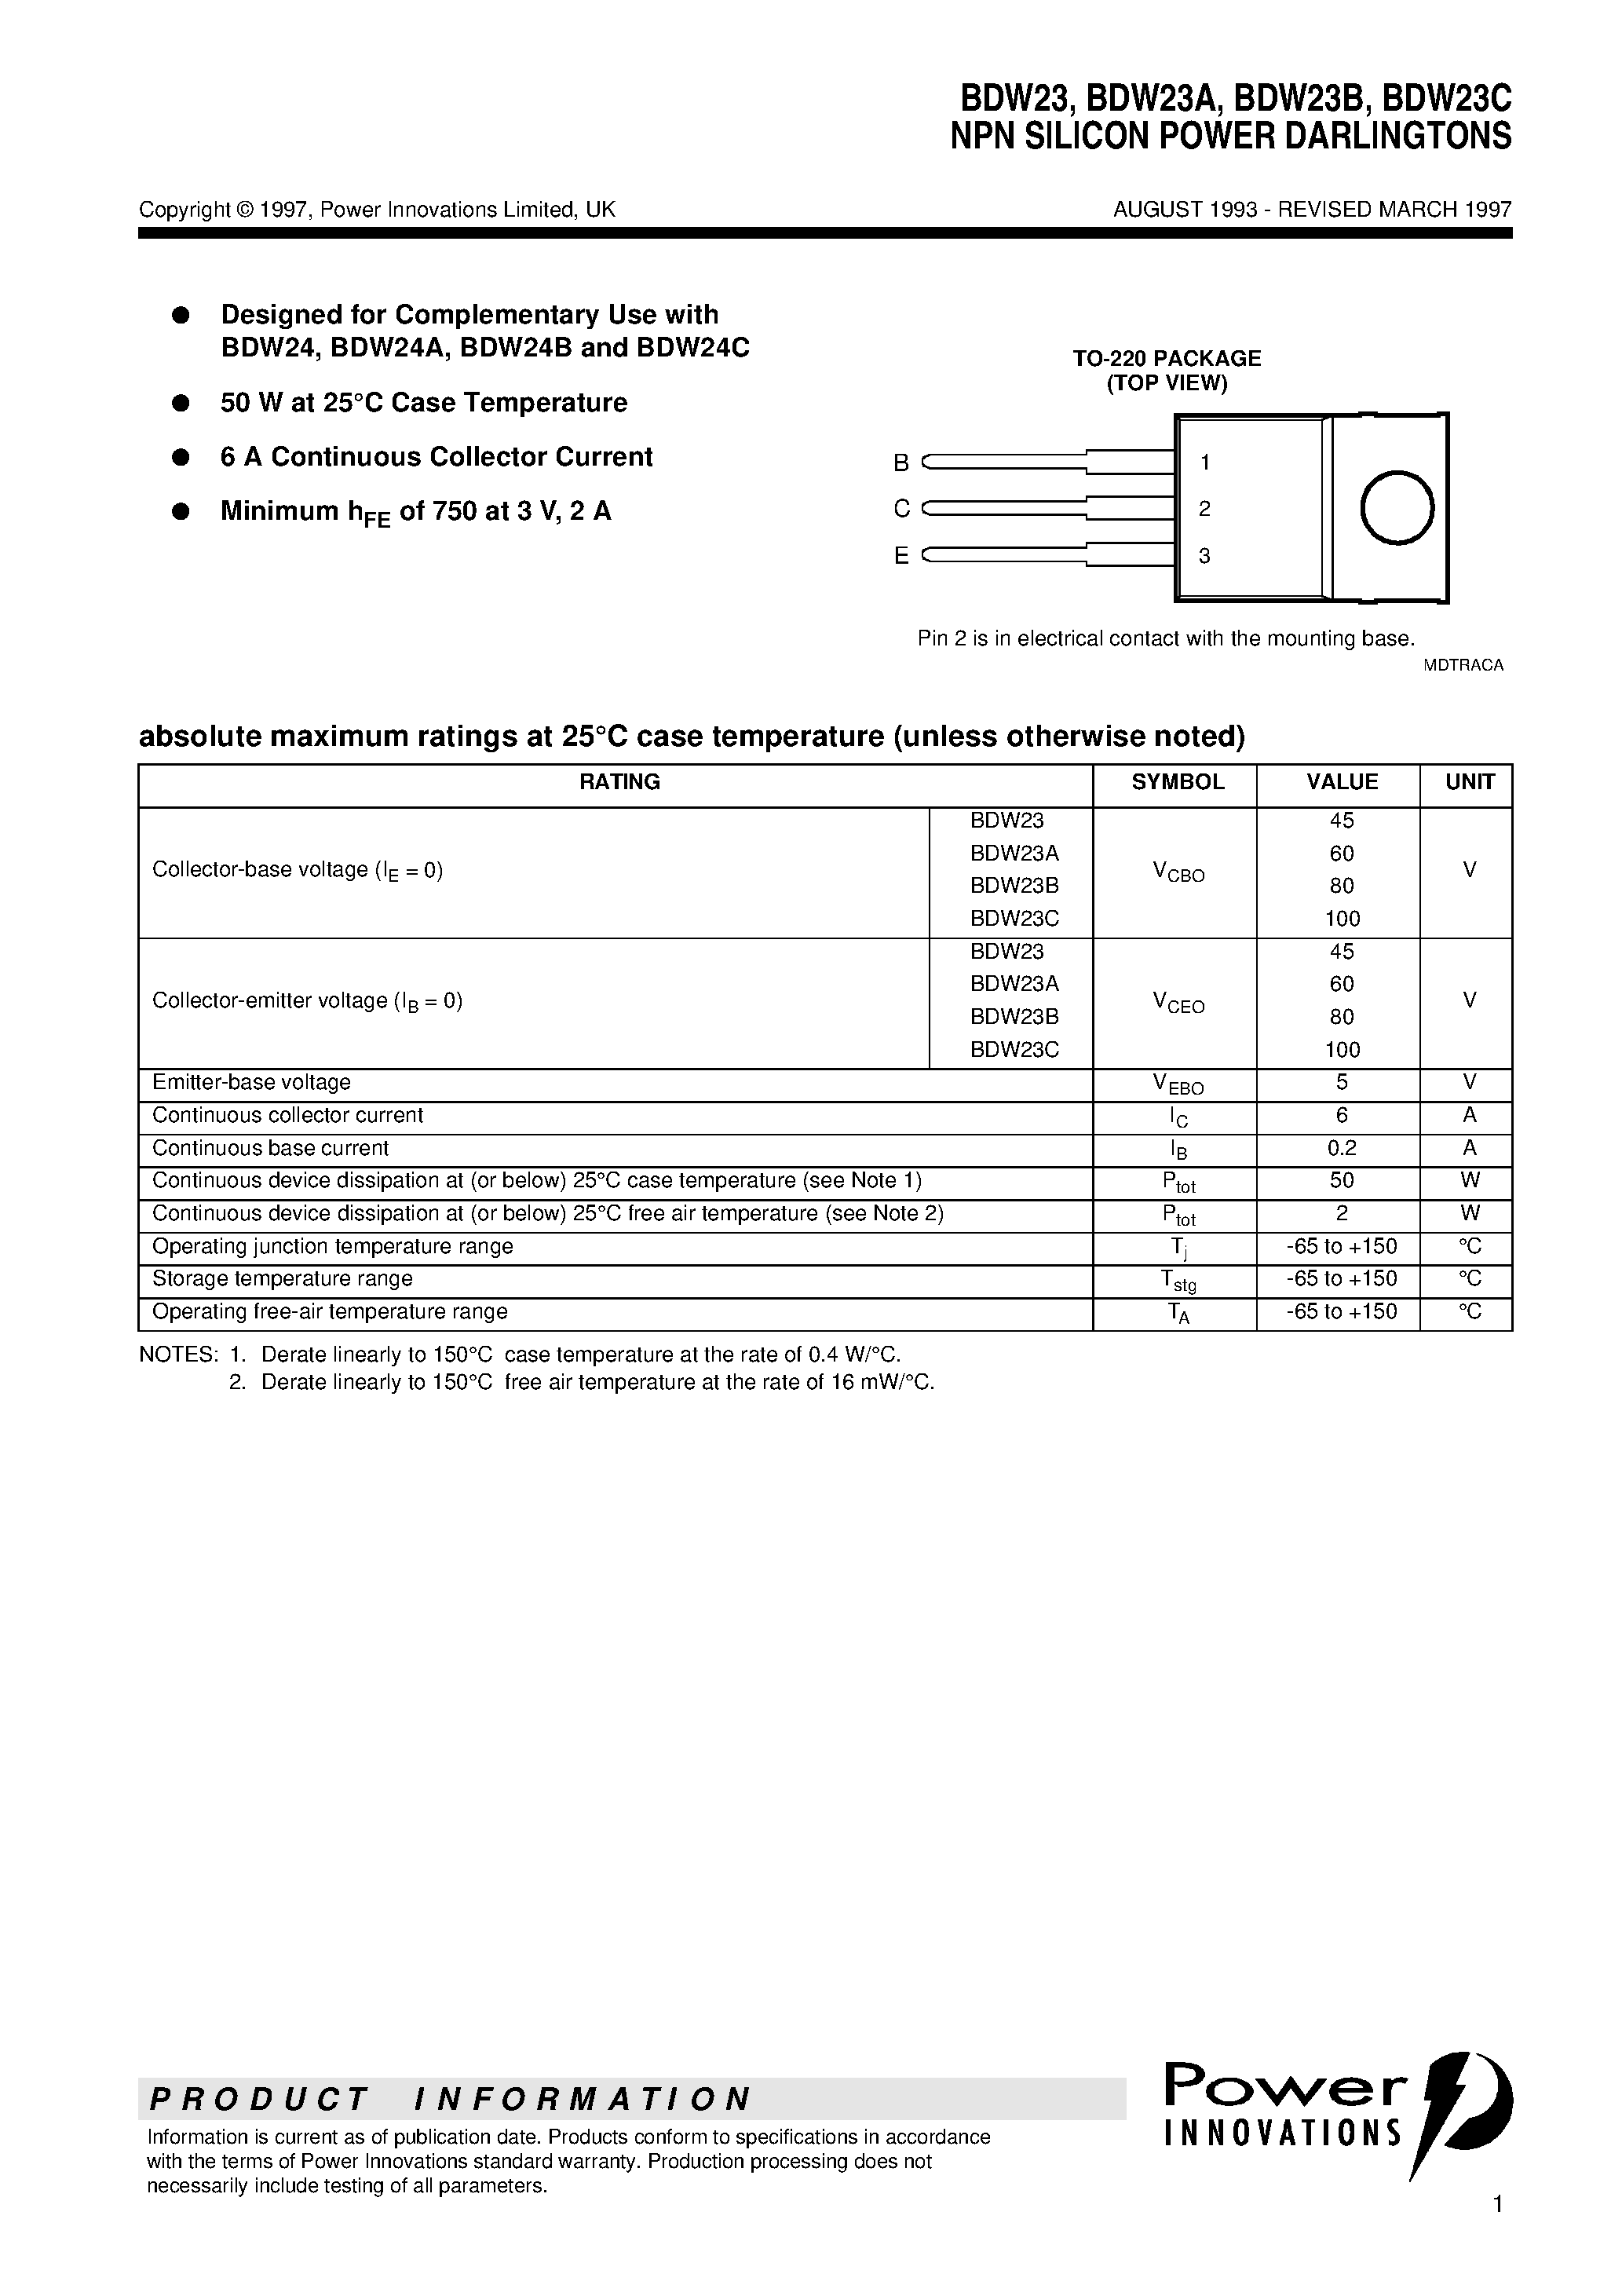 Datasheet BDW23 - NPN SILICON POWER DARLINGTONS page 1